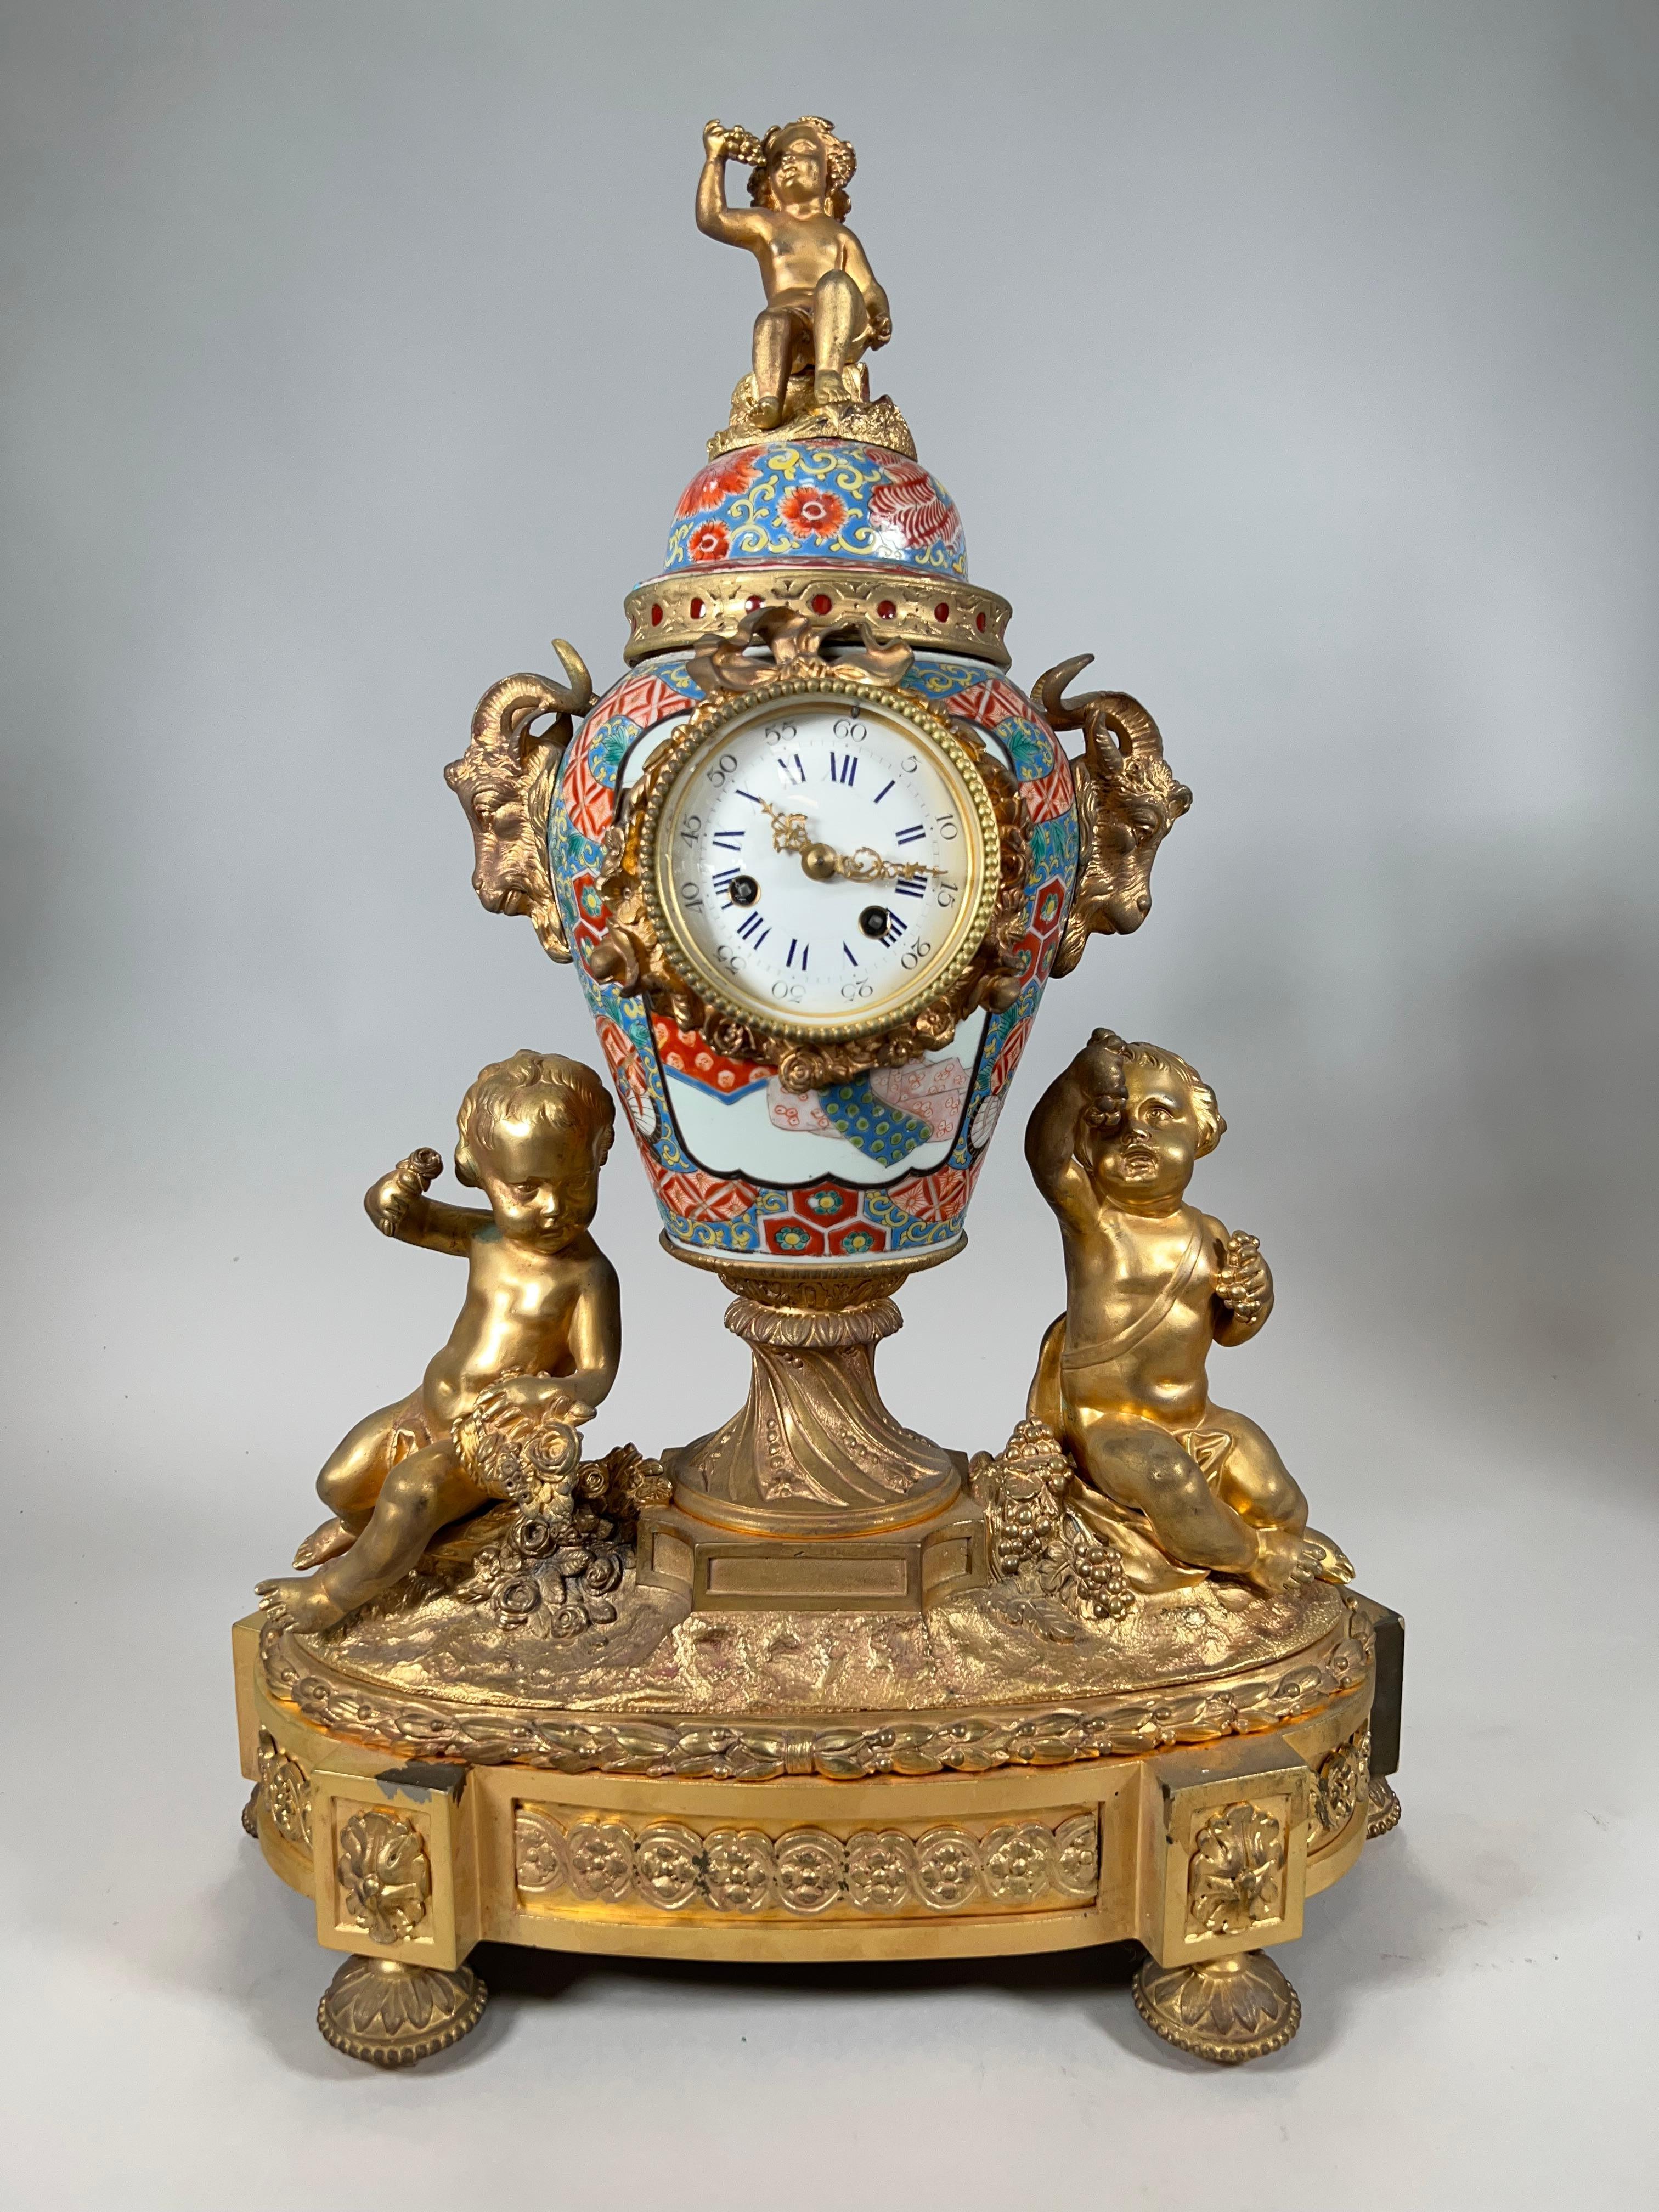 JAPANESE IMARI PORCELAIN AND ORMOLU MOUNTED MANTEL CLOCK, 19TH CENTURY urn shaped with three ormolu mounted cherubs with Roman Numeral and Arabic dial. Dimensions Height: 22